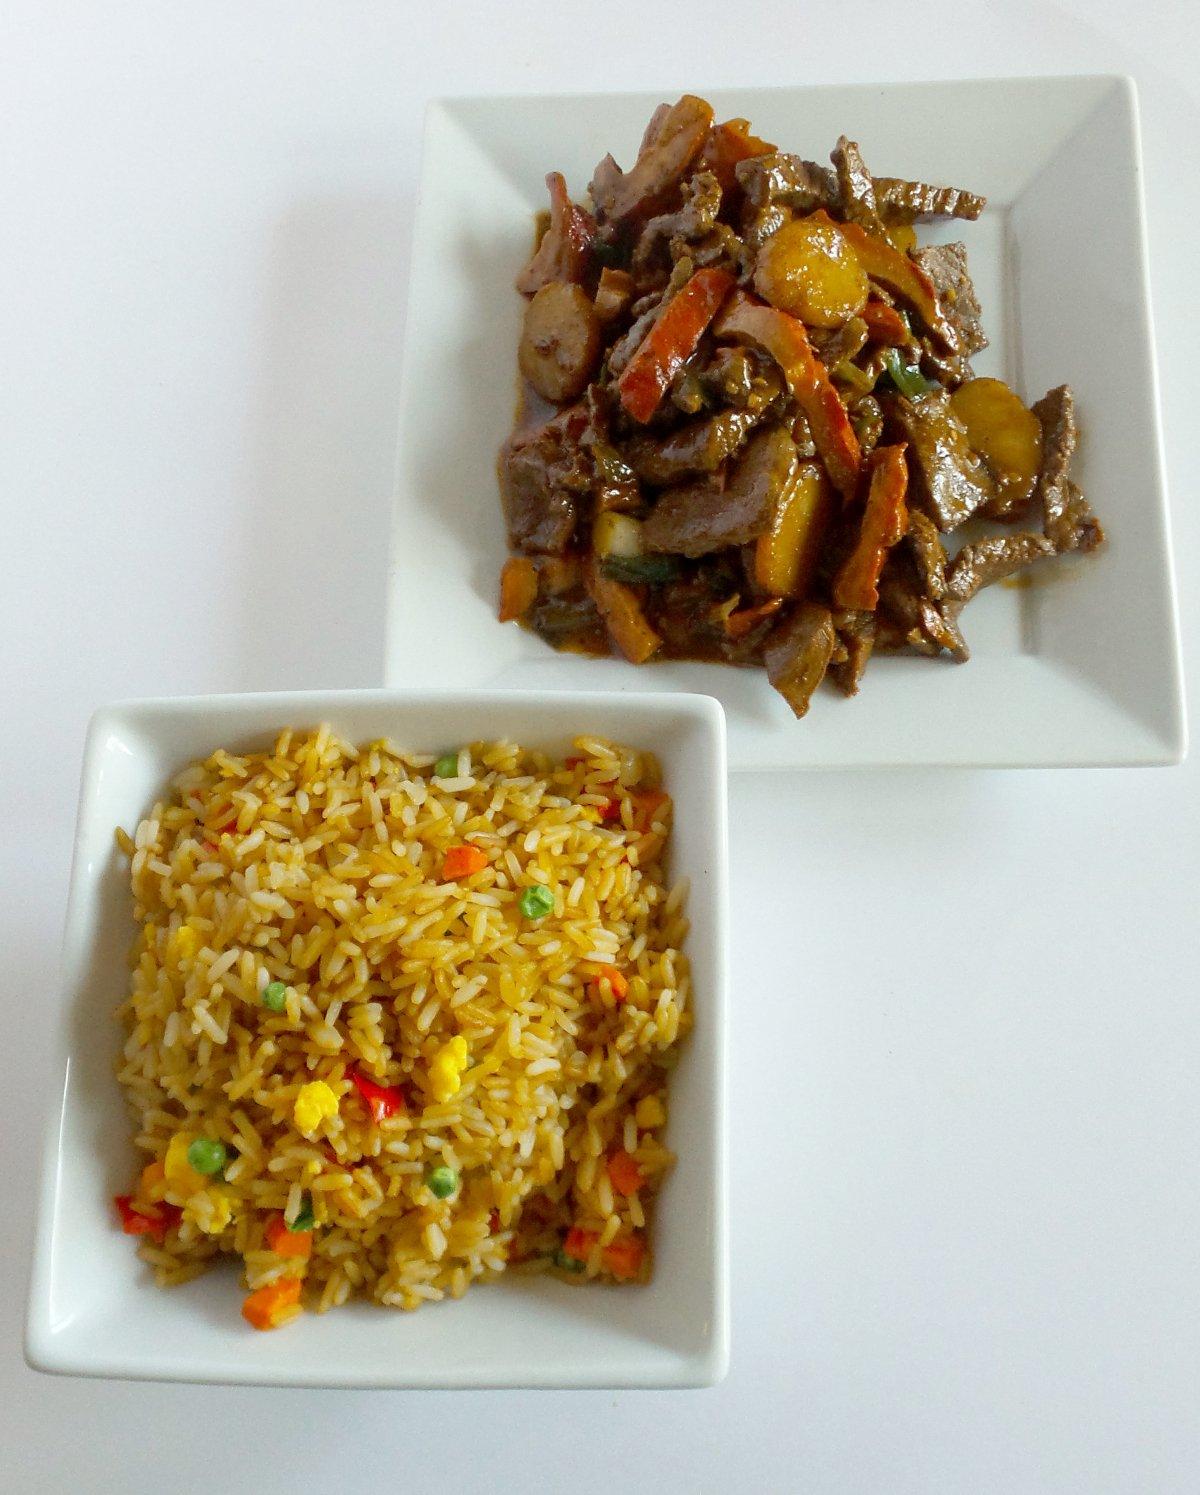 Serve the stir fry with noodles or fried rice for a complete meal.